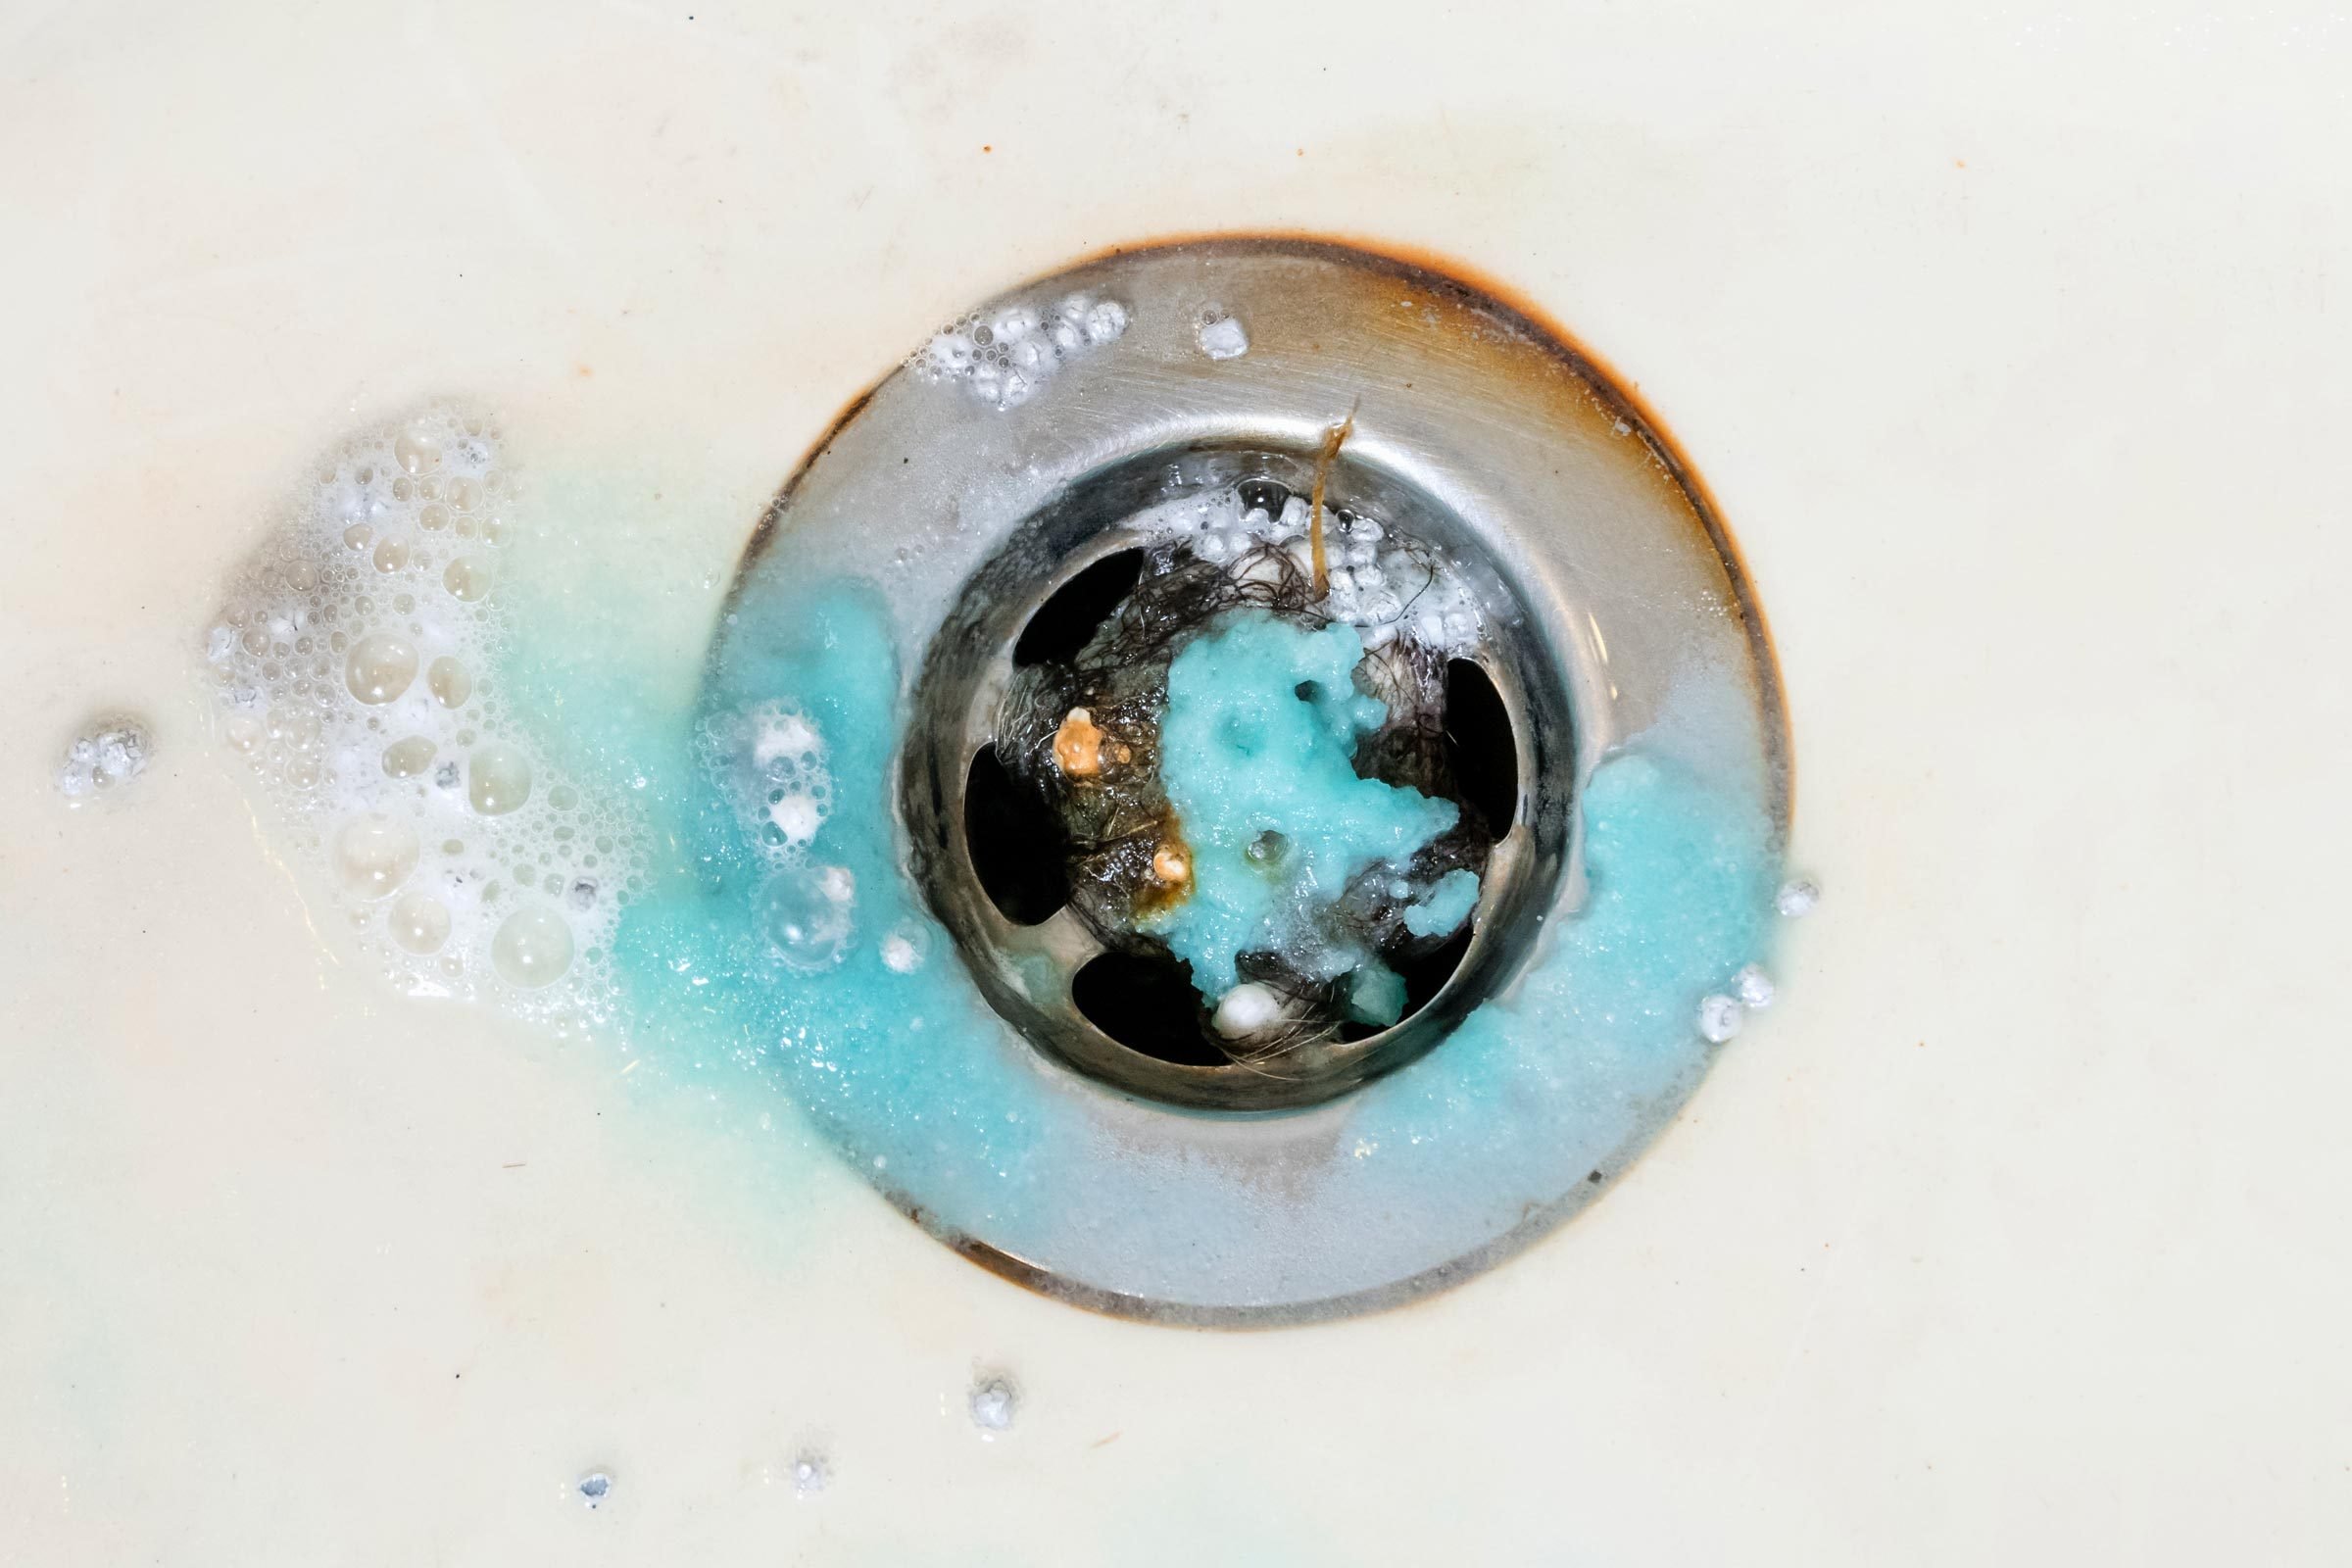 How To Get Rid of Those Shower Drain Smells